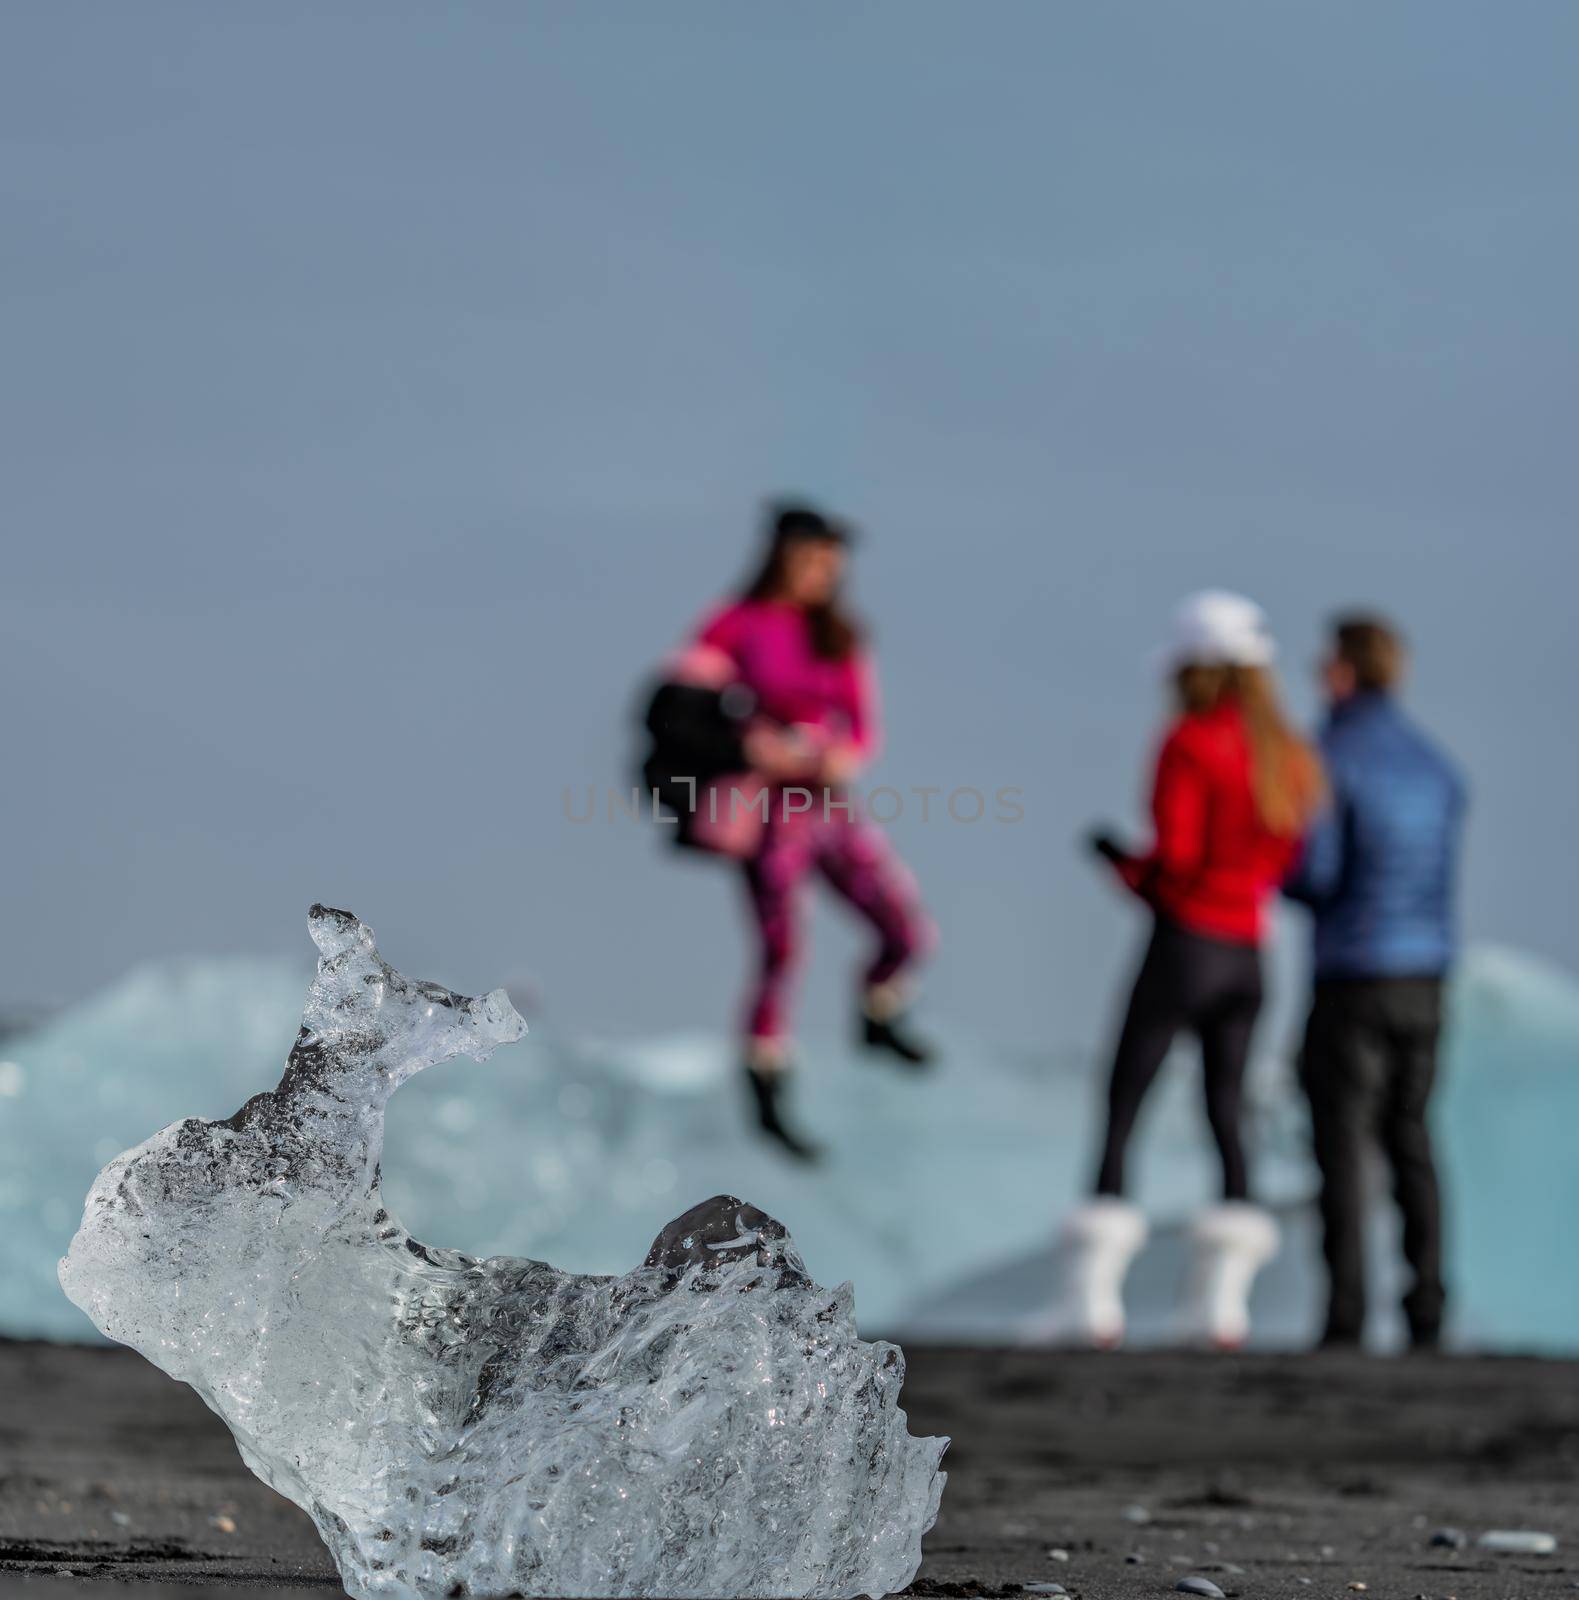 Blurred tourists in the background and iceberg with rabbit shape in focus